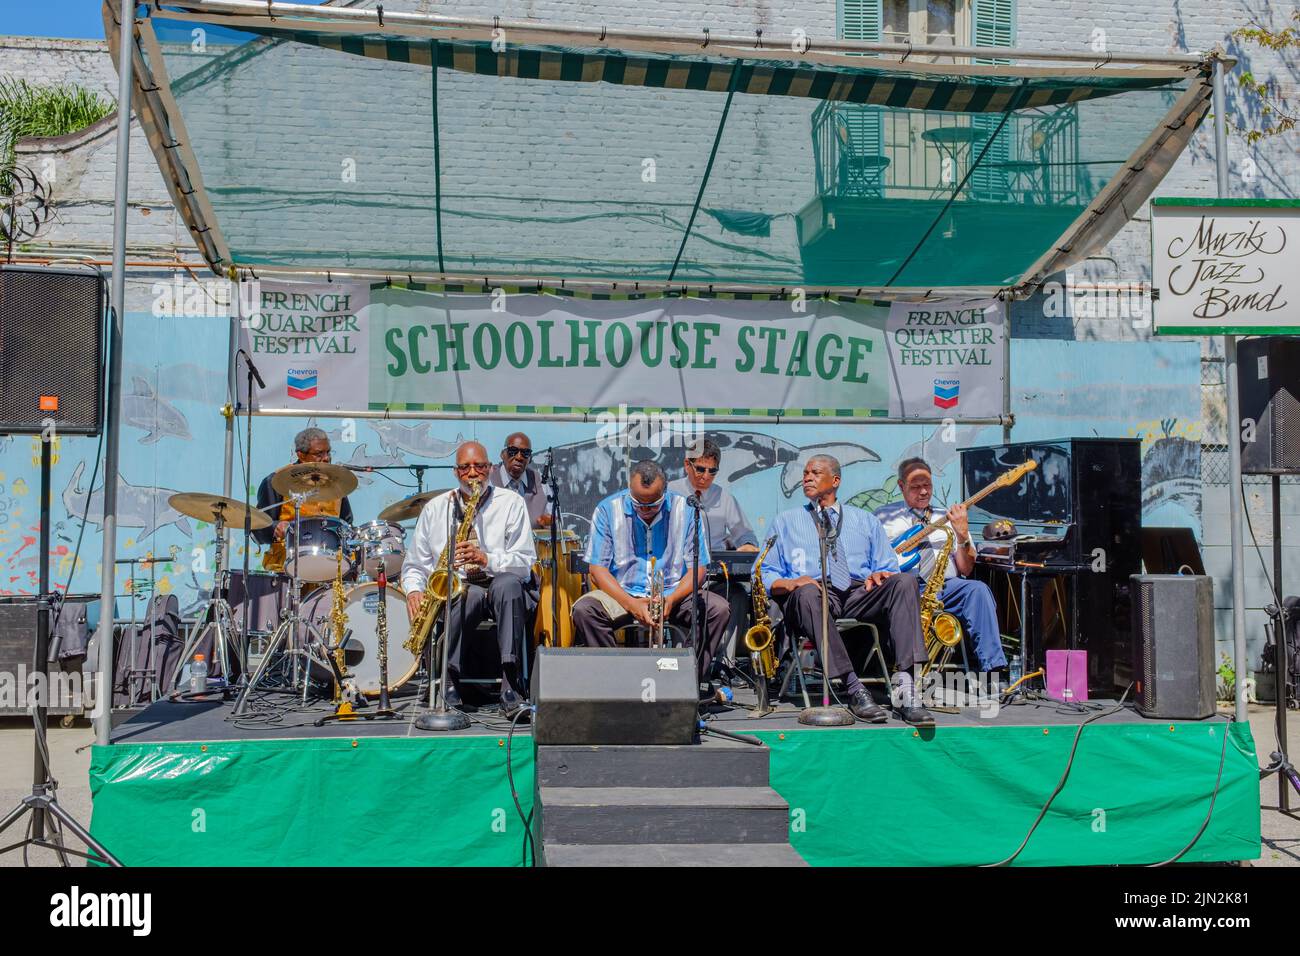 NEW ORLEANS, LA, USA - APRIL 9, 2017: The Muzik Jazz Band performs on the Schoolhouse Stage at the free French Quarter Festival Stock Photo